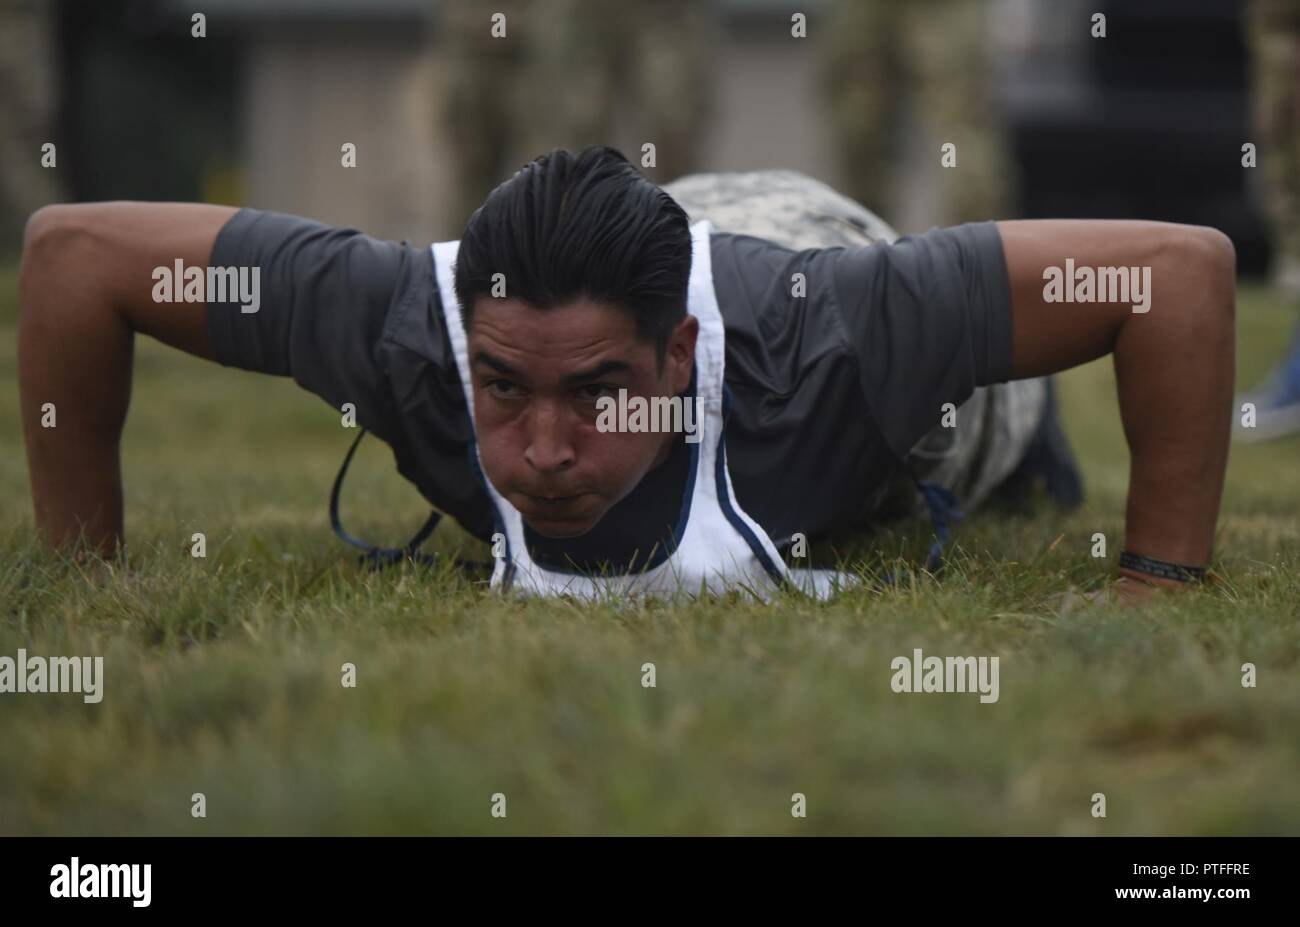 Sgt. Michael Cohen with the D.C. National Guard completes the push-up event of the Army Physical Fitness Test for the 2017 Army National Guard Best Warrior Competition at Camp Ripley, Minnesota, July 18, 2017. The event, originally scheduled for the night prior, was delayed by severe weather and be would be the first of many physically-demanding challenges the competitors would undergo on Day 2. Minnesota National Guard Stock Photo